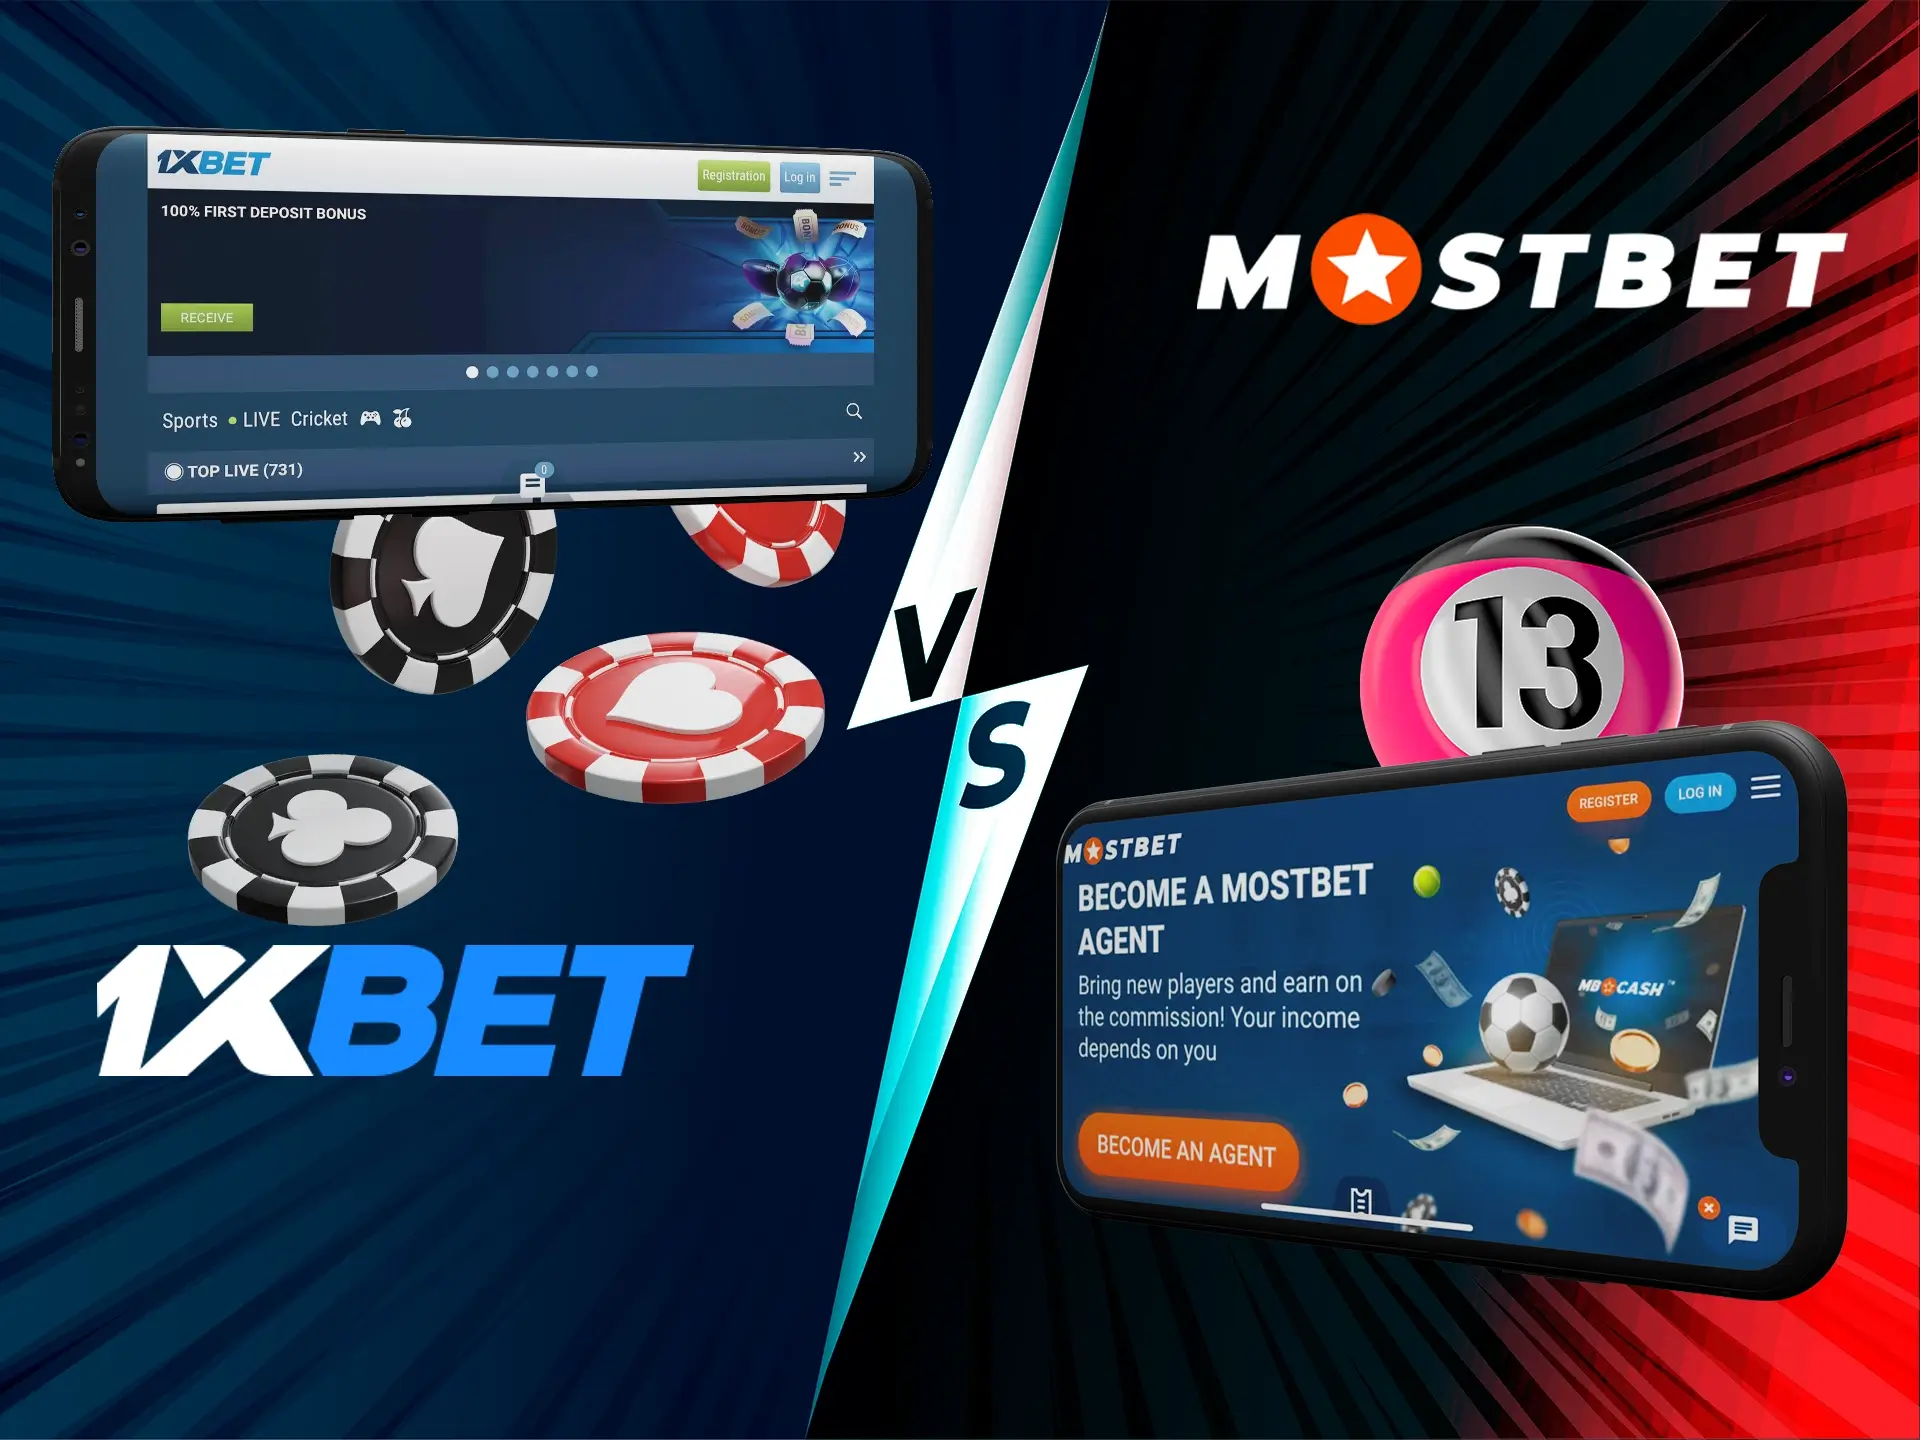 Choose the right mobile app from Mostbet or 1xbet.